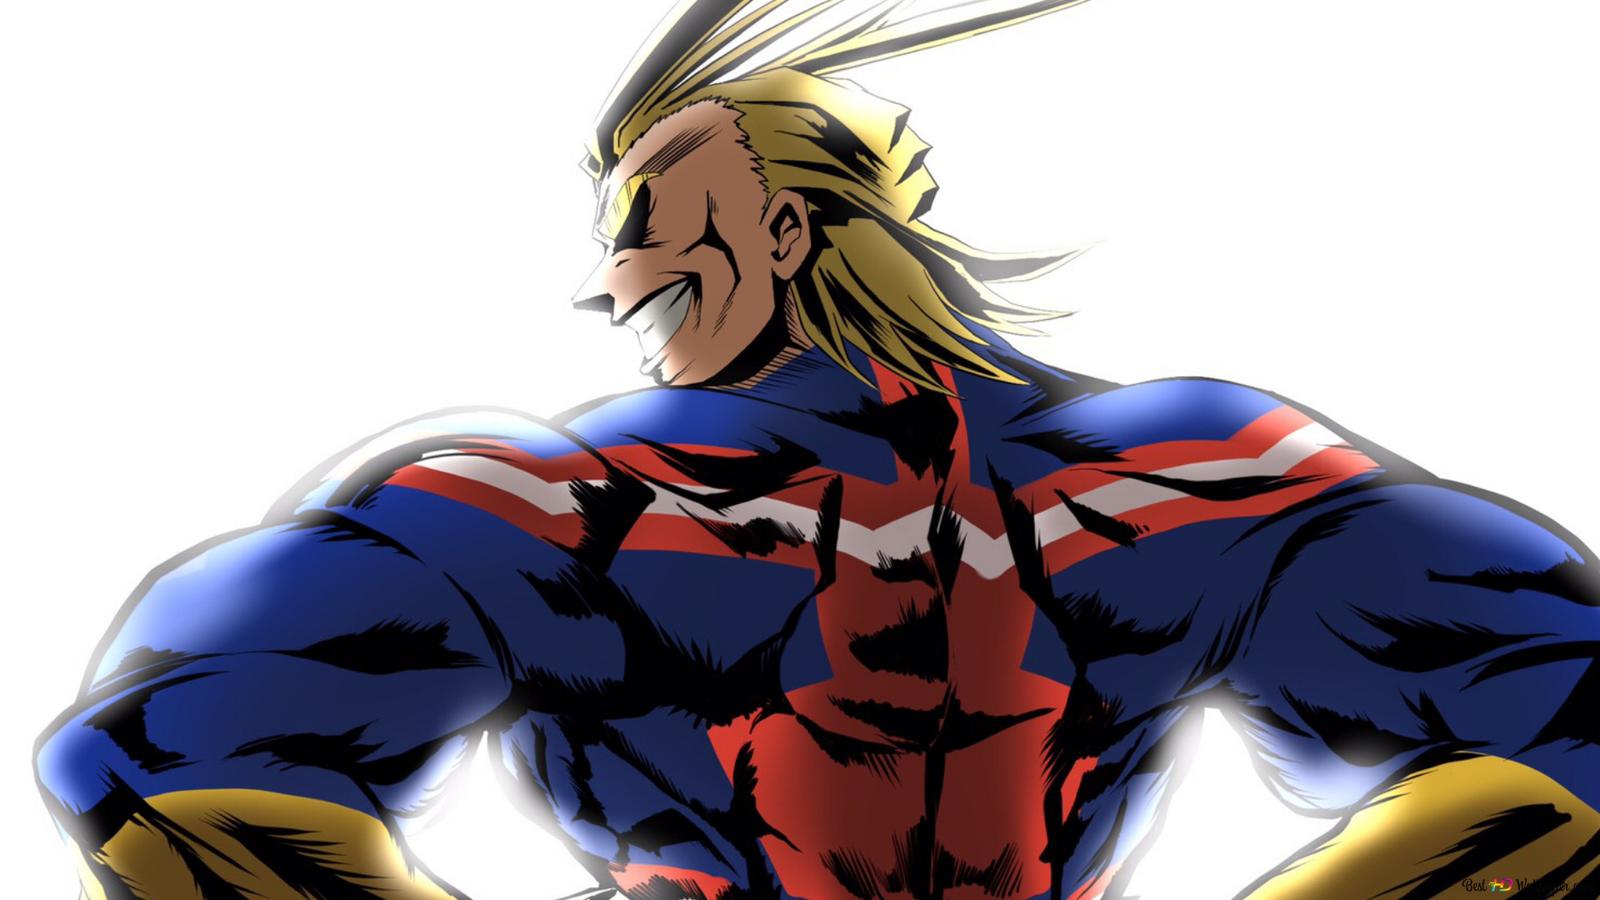 All Might Hero Pose HD wallpaper download